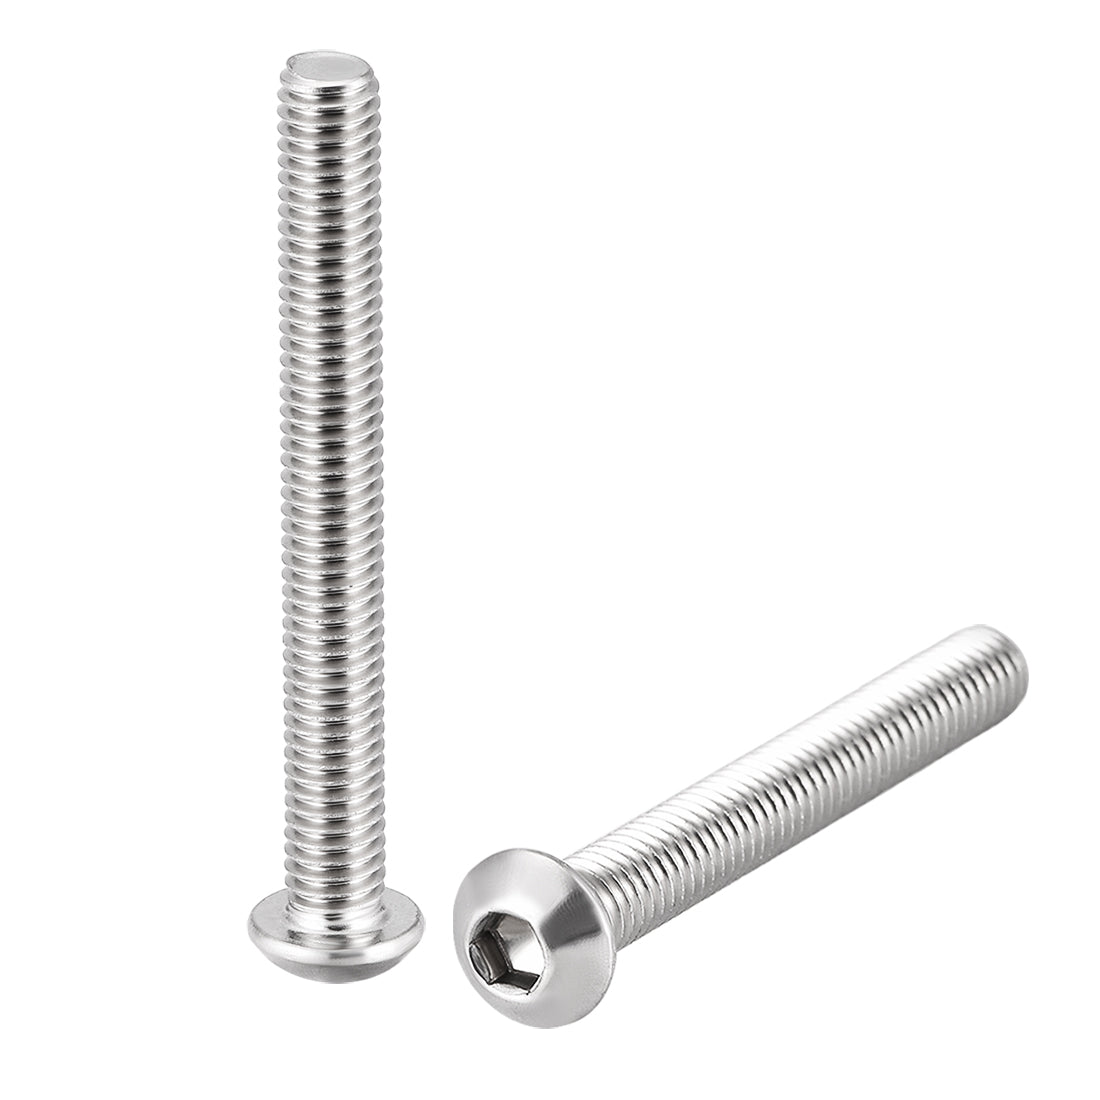 uxcell Uxcell M6x50mm Machine Screws Hex Socket Round Head Screw 304 Stainless Steel Fasteners Bolts 20pcs